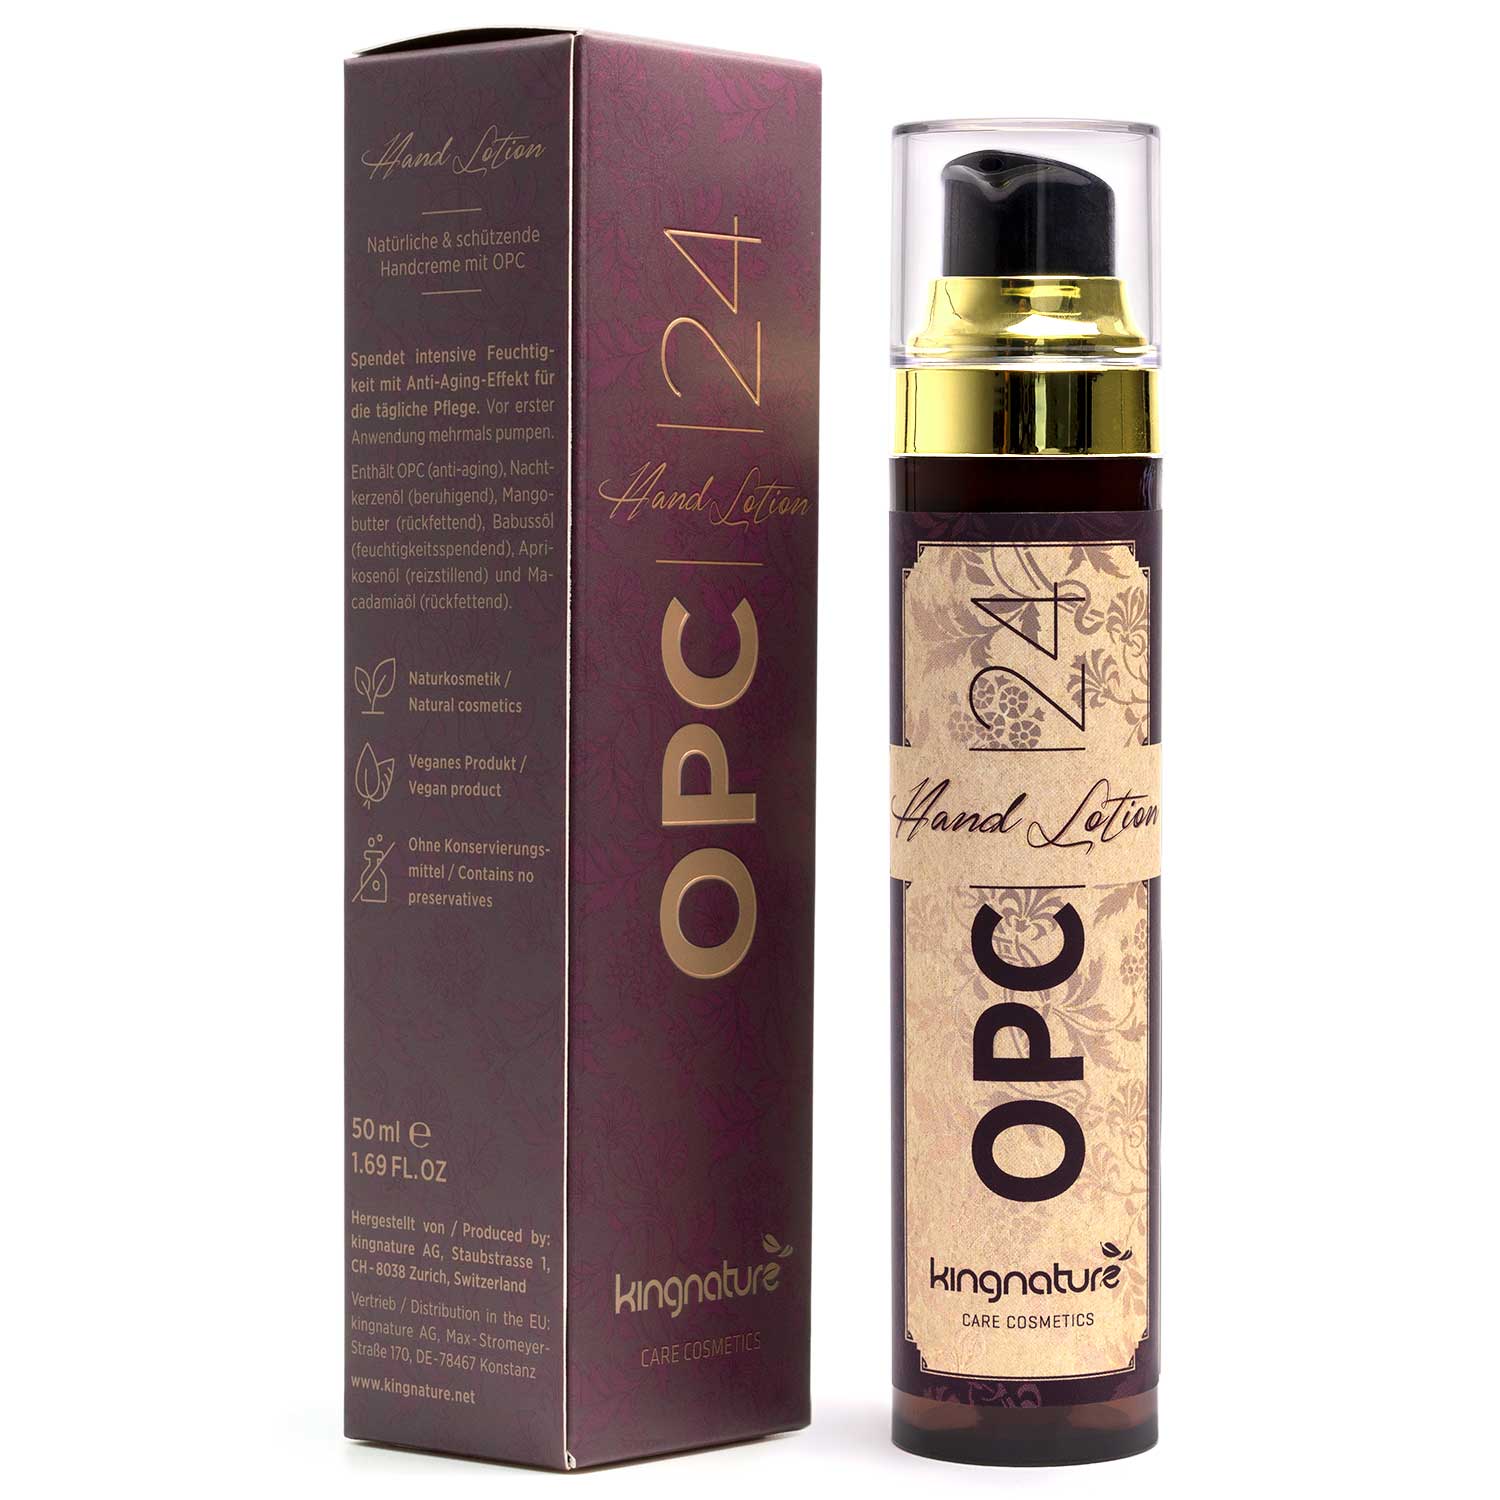 OPC 24 Hand Lotion